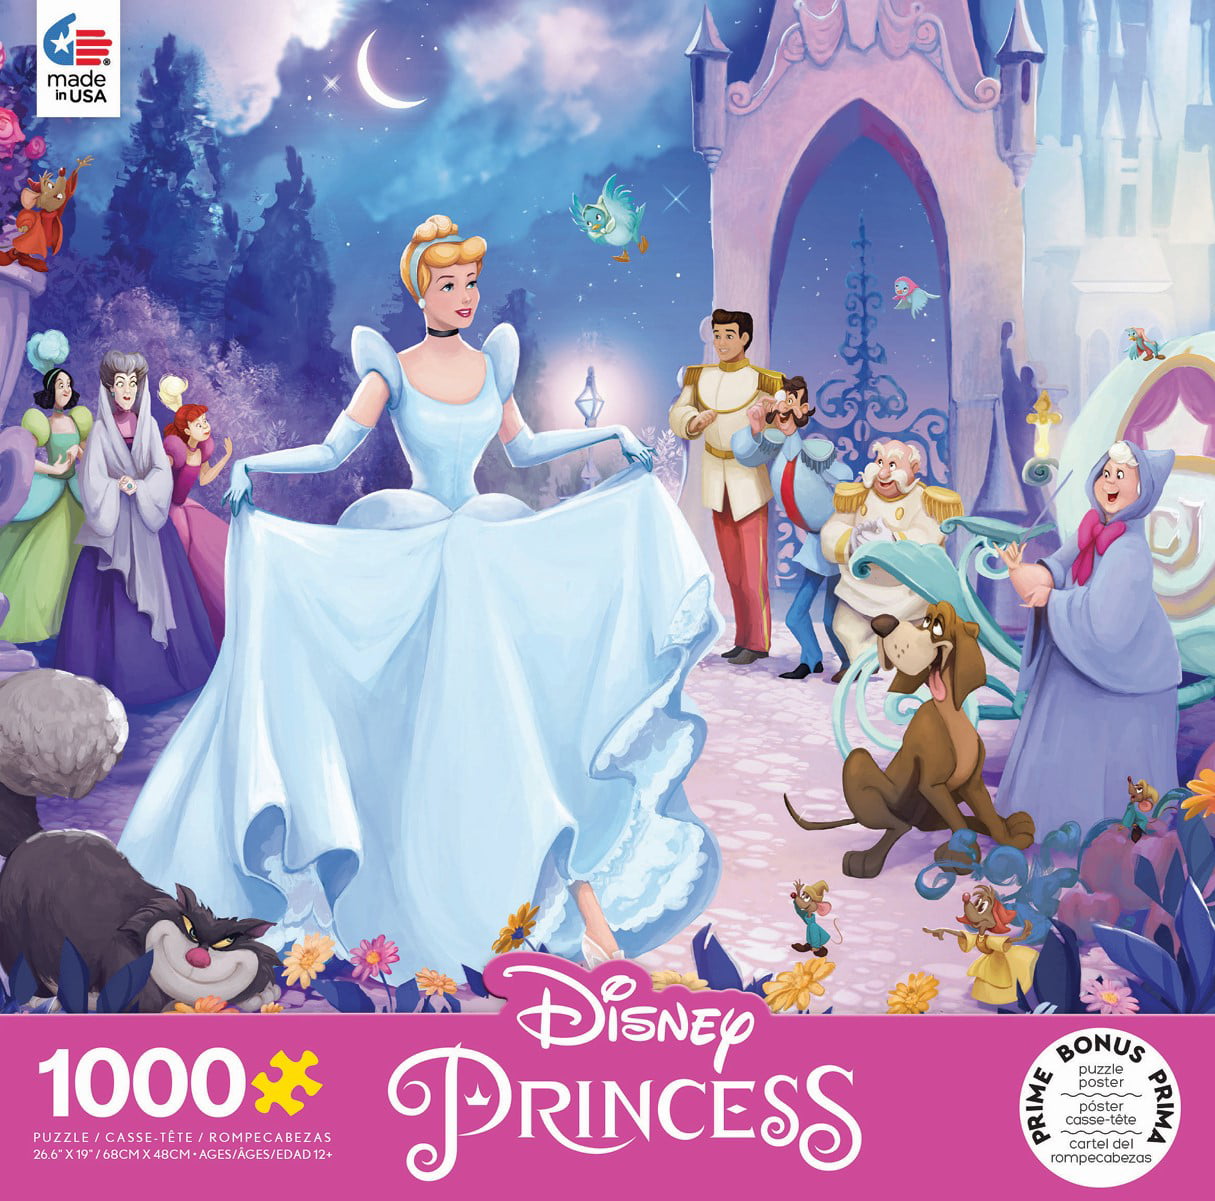 Tenyo Disney Cinderella Moment Away 1000 Piece Jigsaw Puzzle for sale online 